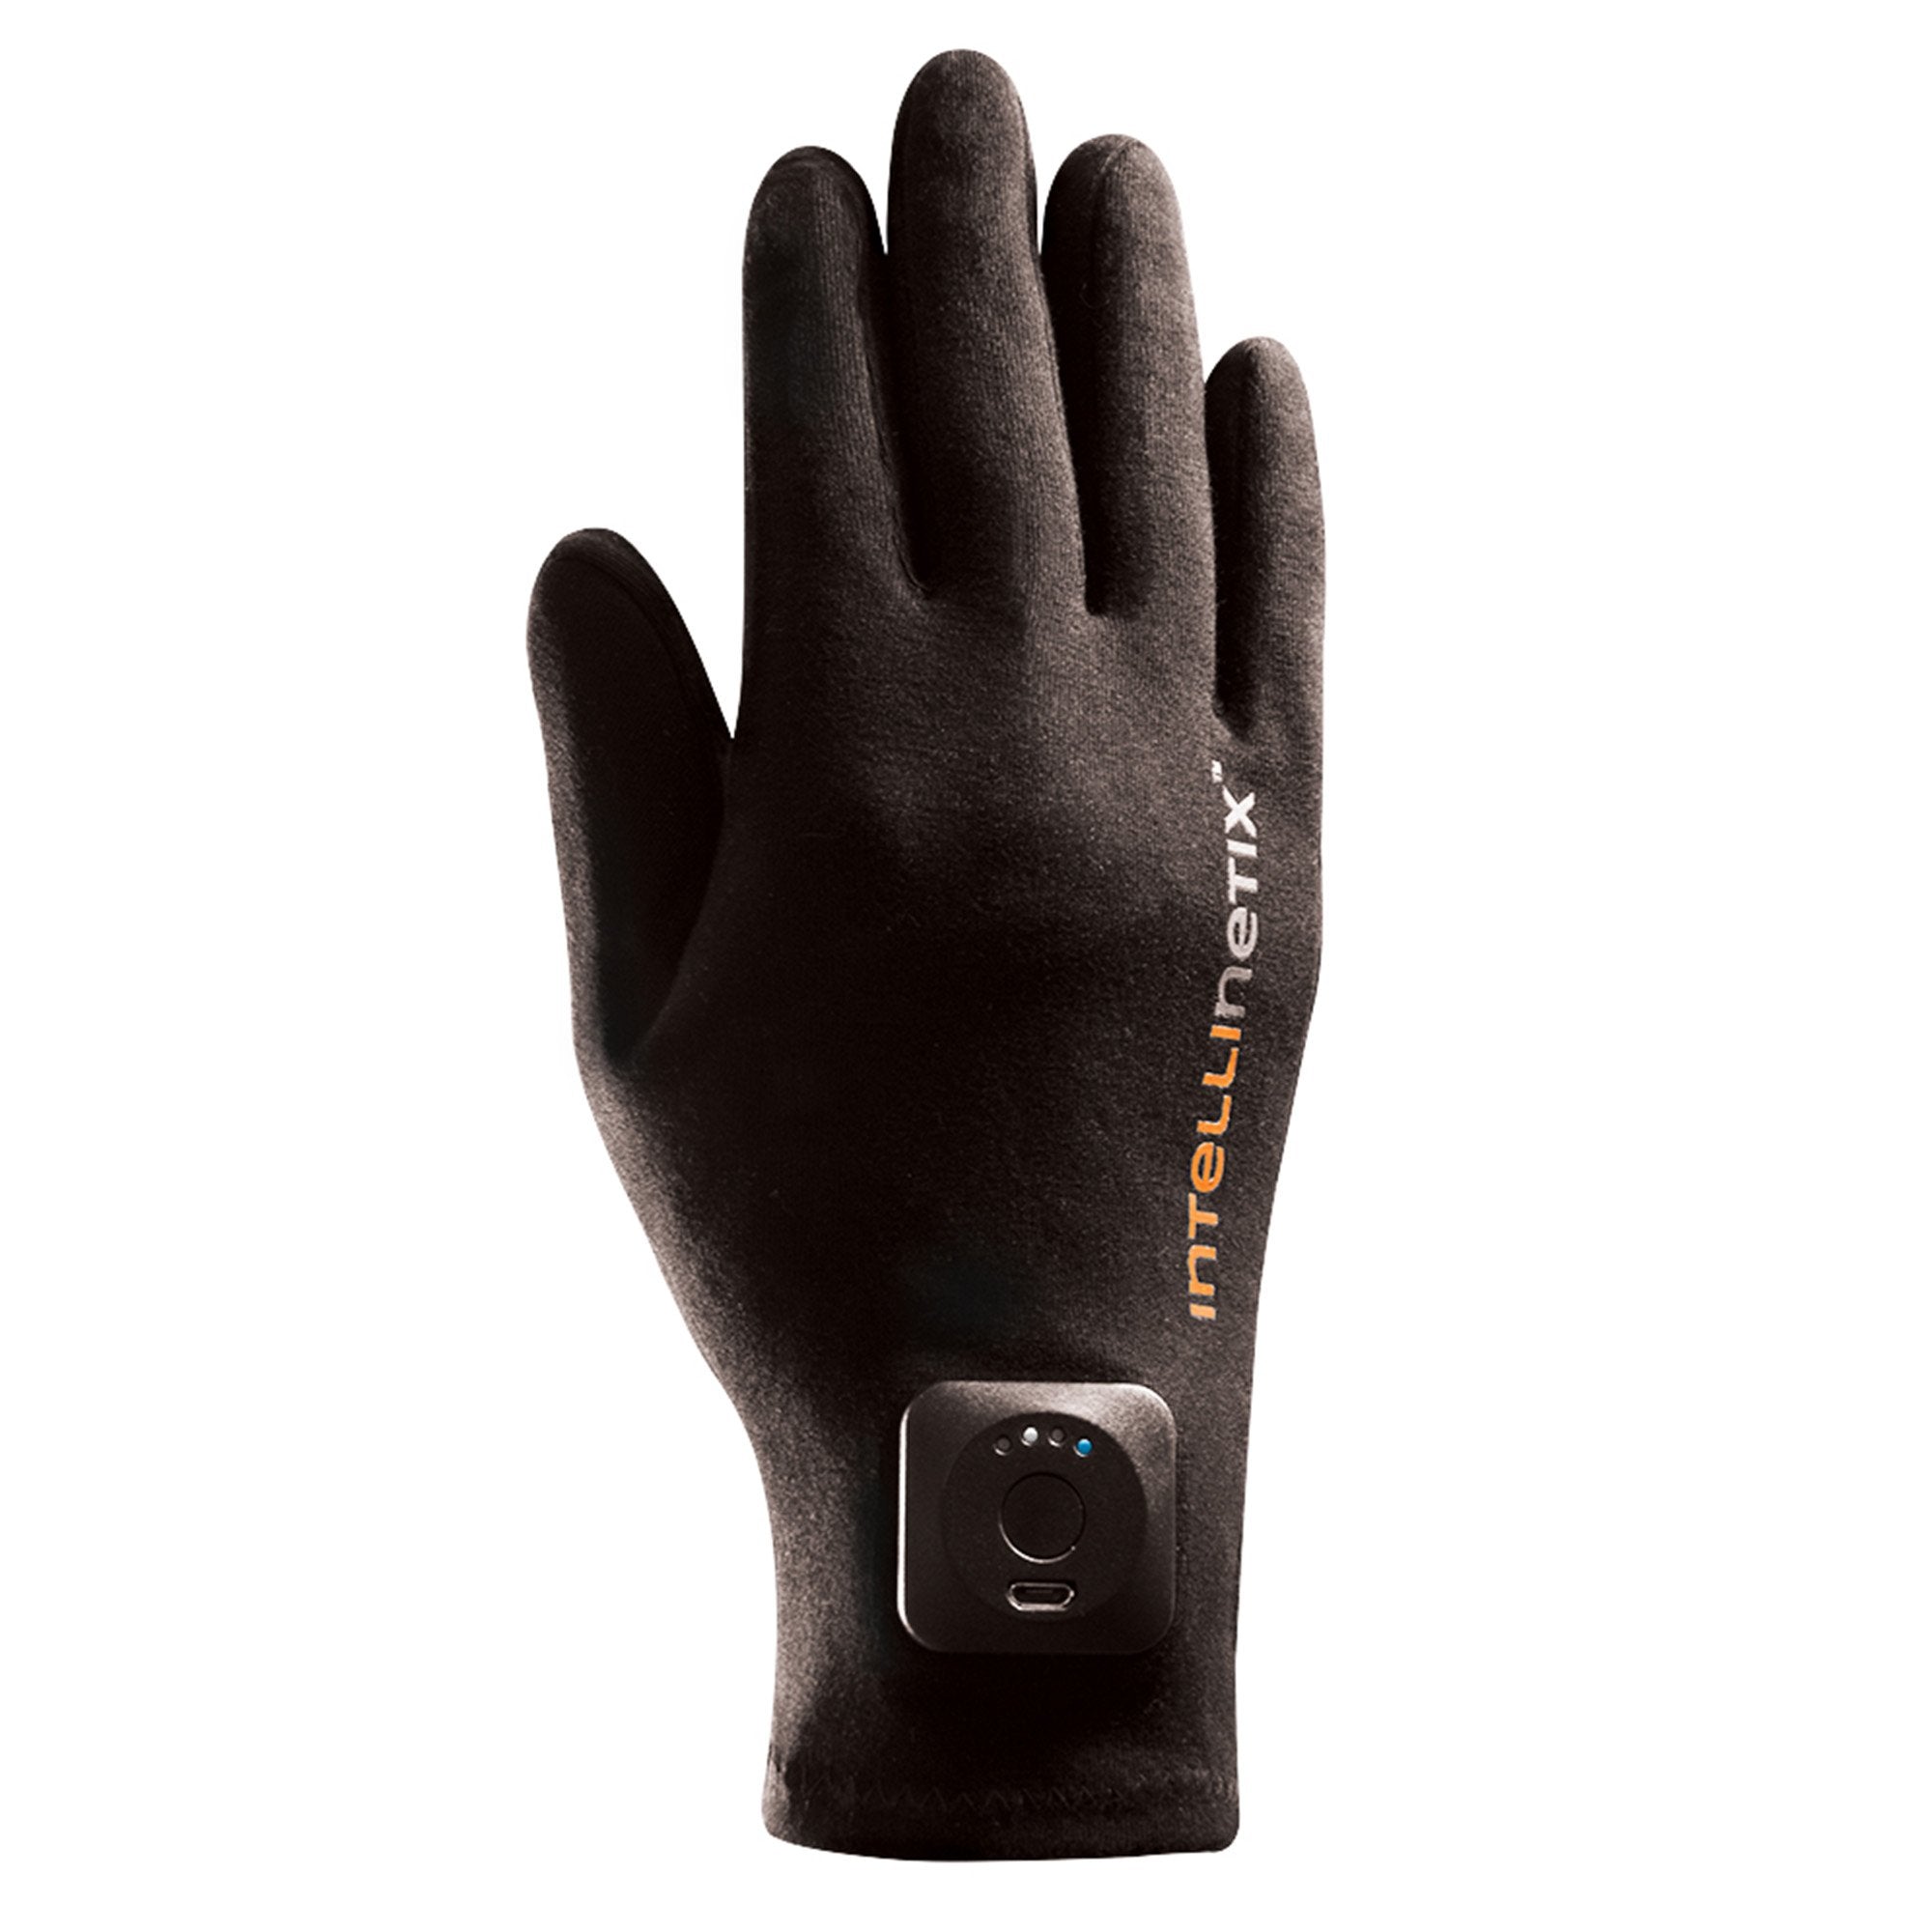 Vibration Therapy Glove Intellinetix Left and Right Hand Medium